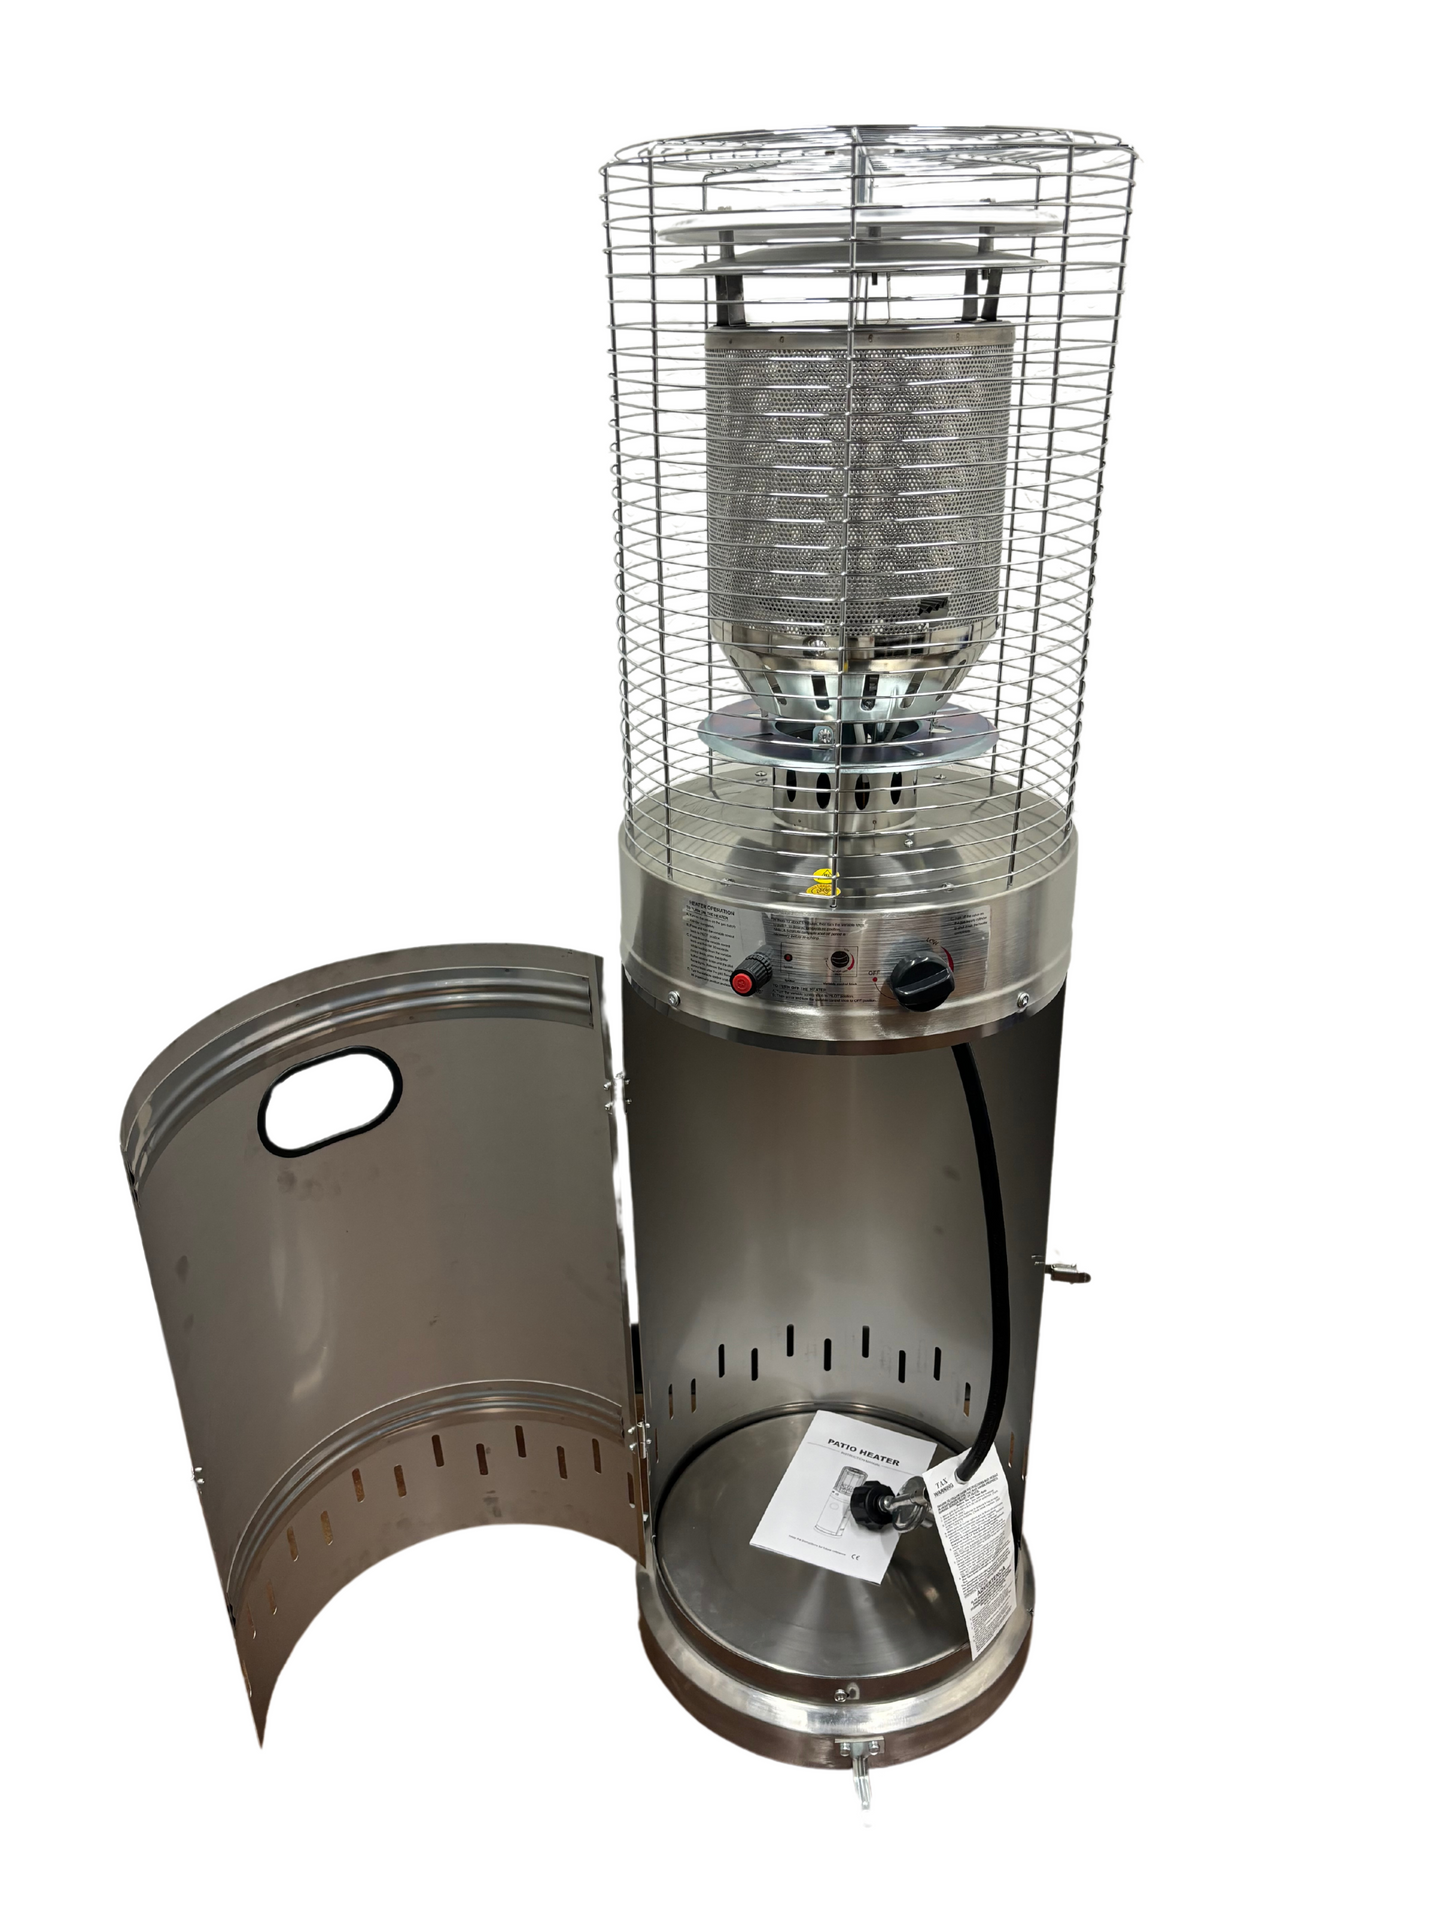 The Radius 4.5 Foot Patio Heater Stainless Steel - Propane Only